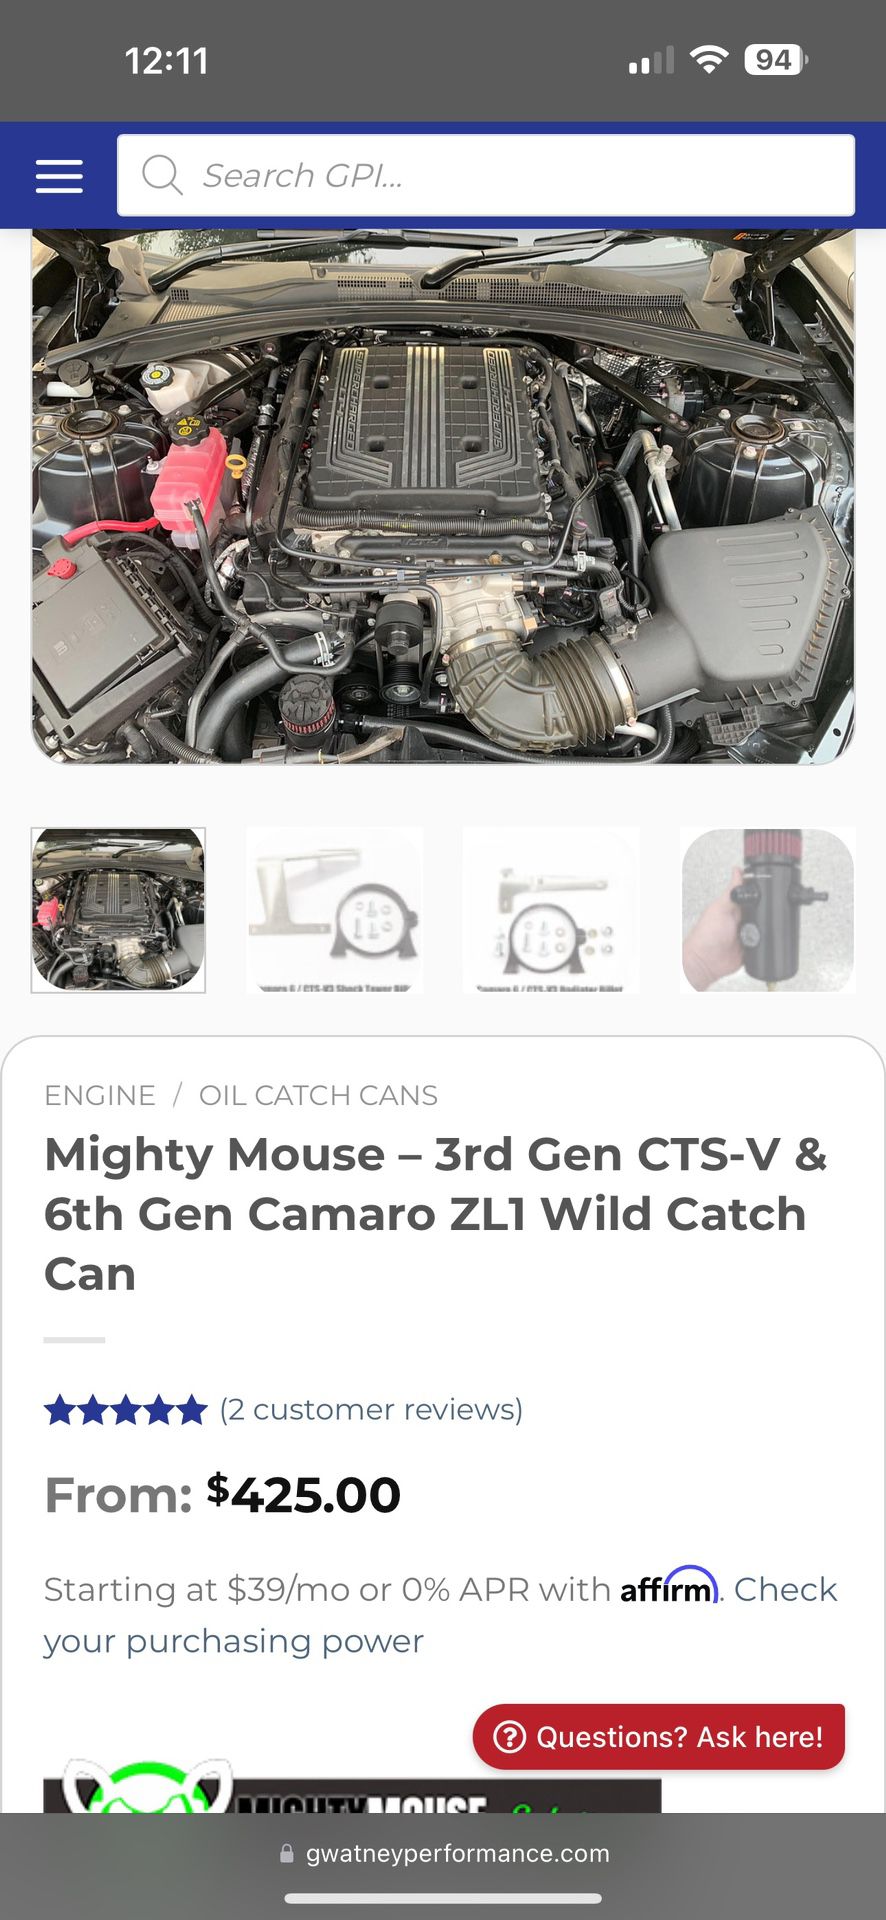 Mighty Mouse Wild Catch Can 3rd Gen CTS-V & 6th Gen Camaro